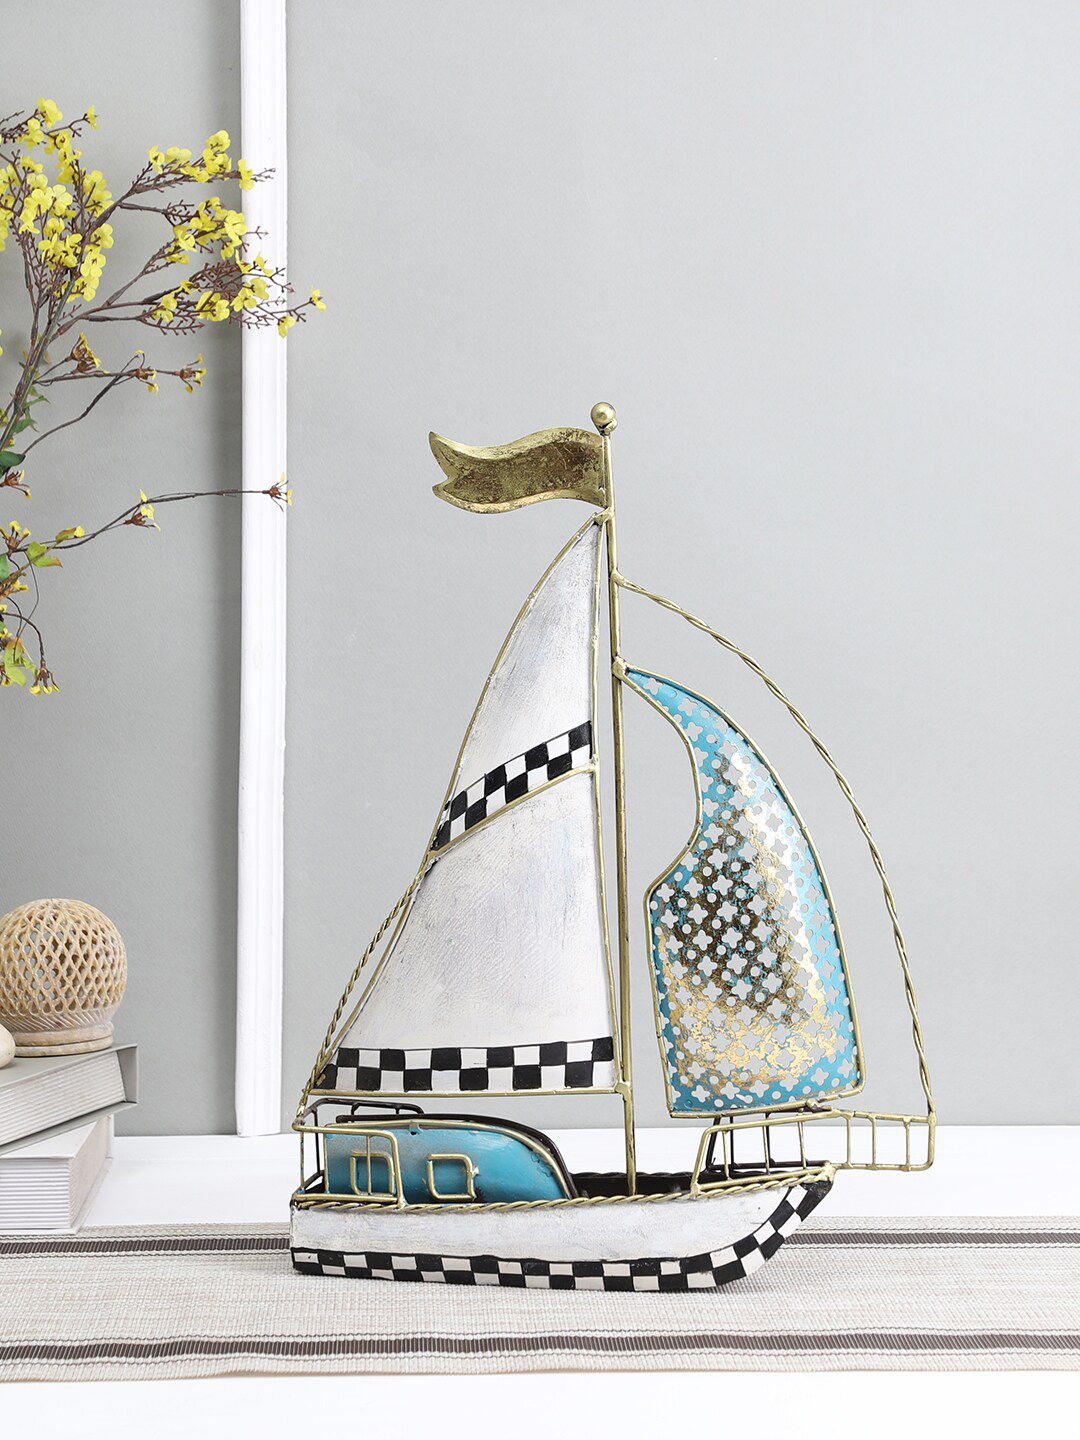 Aapno Rajasthan White and Blue Breezy and Serene Boat Table Decor Showpiece Price in India